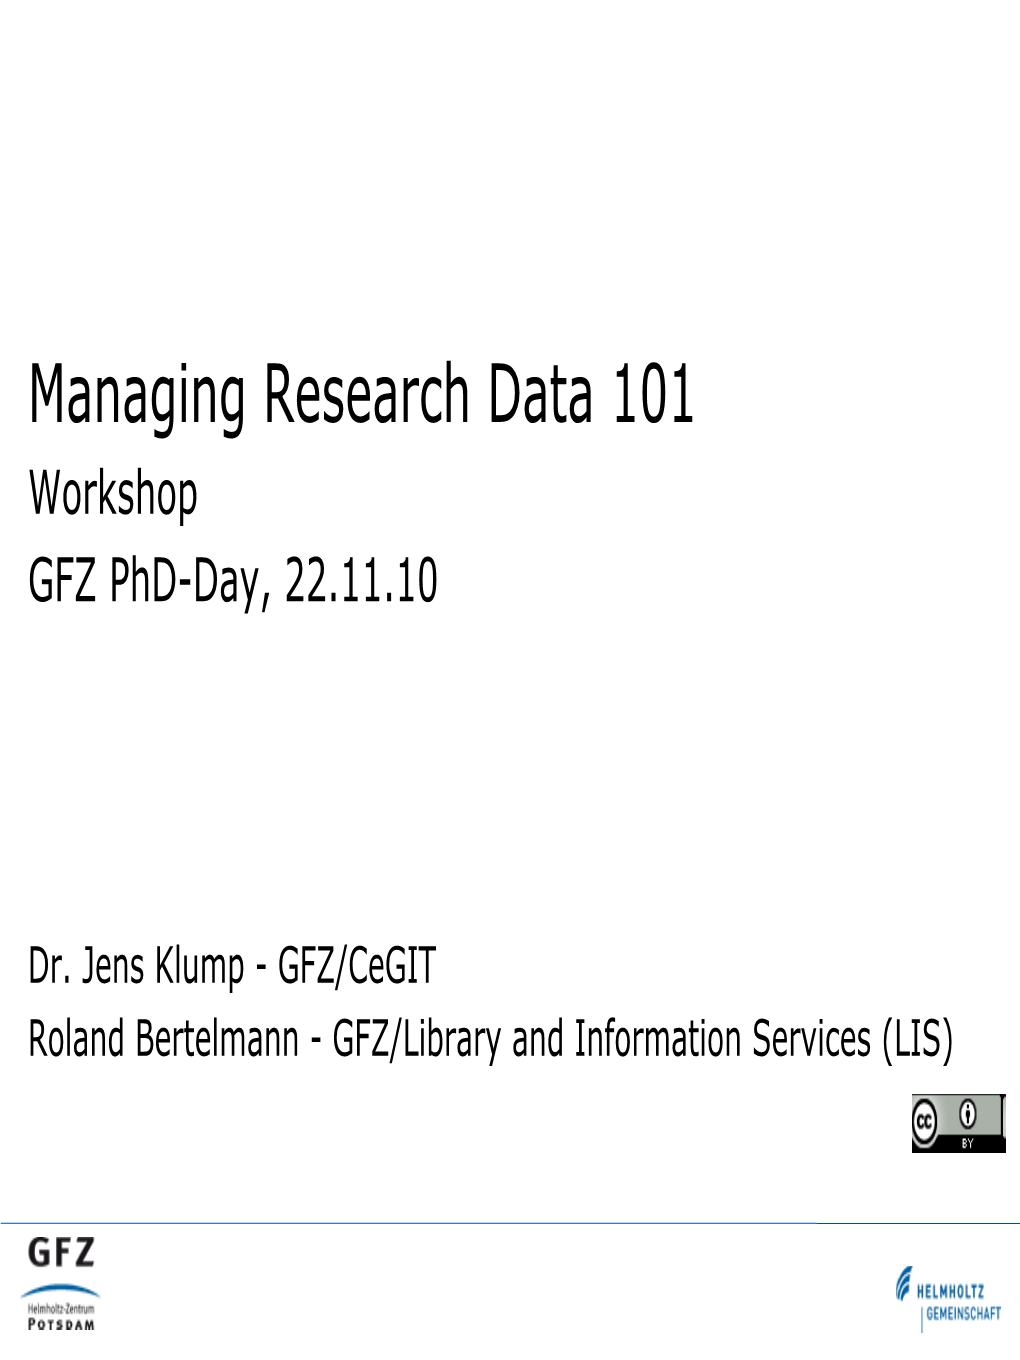 Managing Research Data 101 Workshop GFZ Phd-Day, 22.11.10